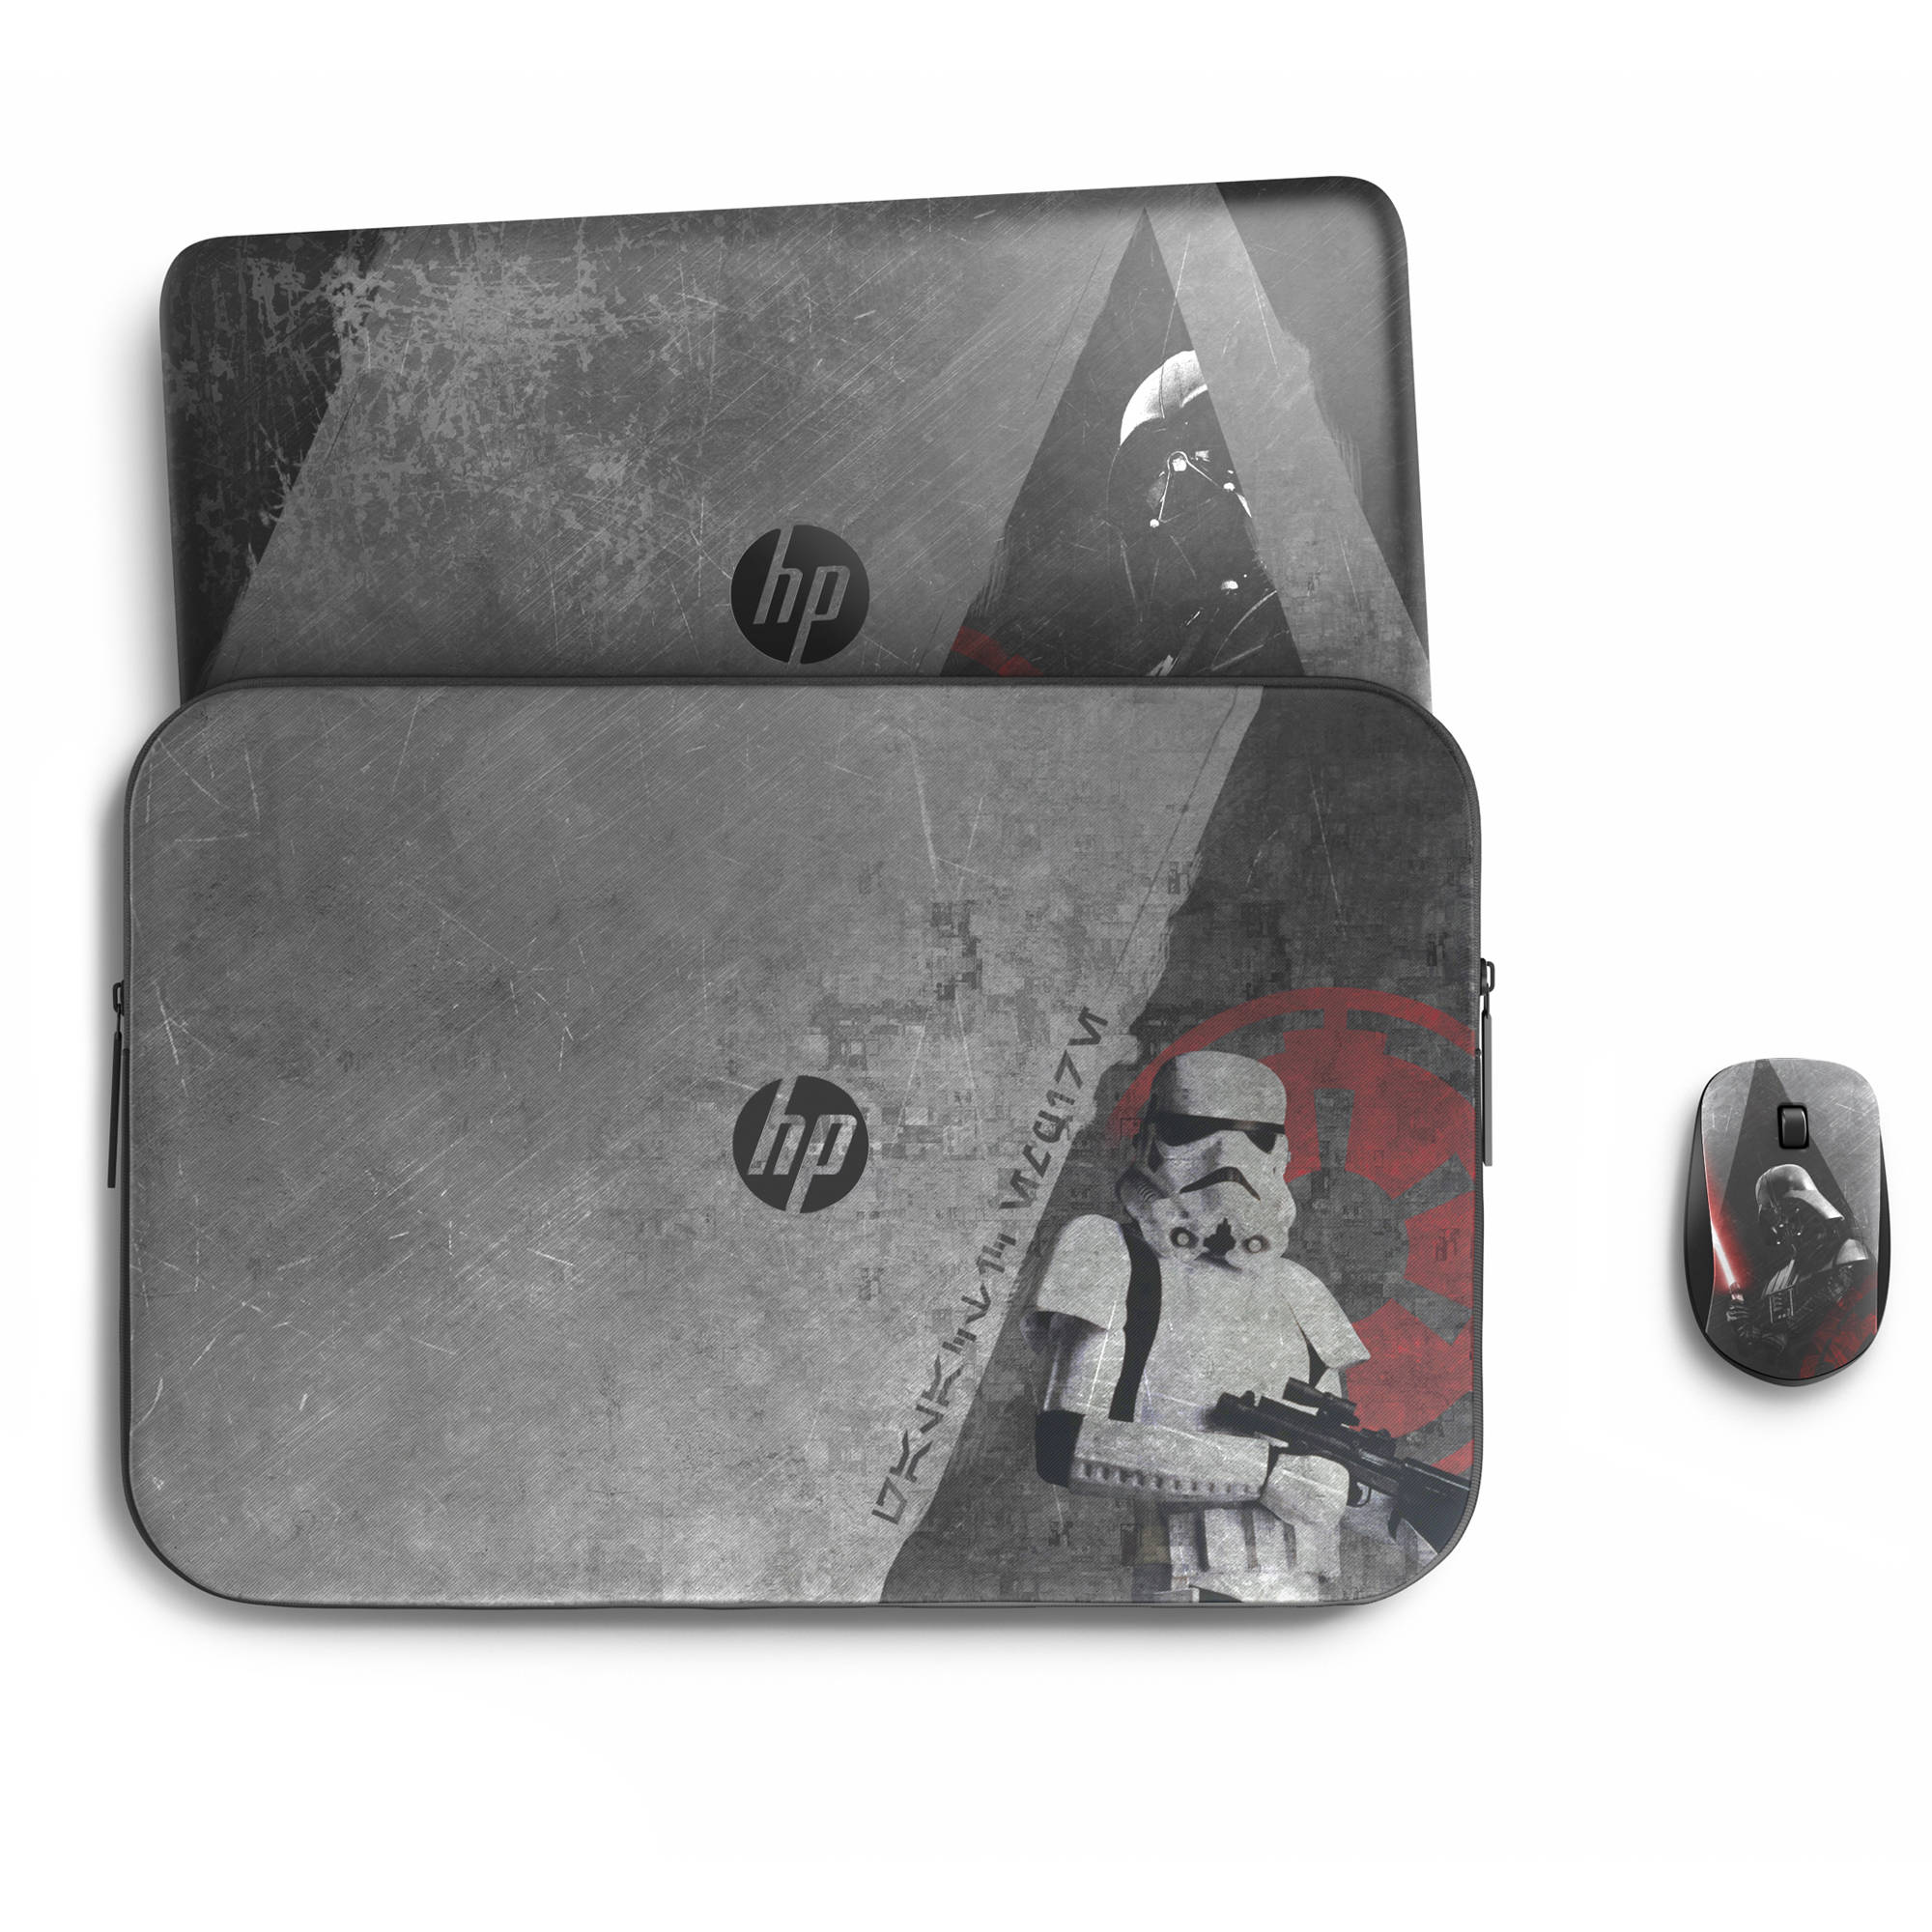 HP Star Wars Special Edition Sleeve, Fits Most Laptops Up to 15.6" - image 2 of 3